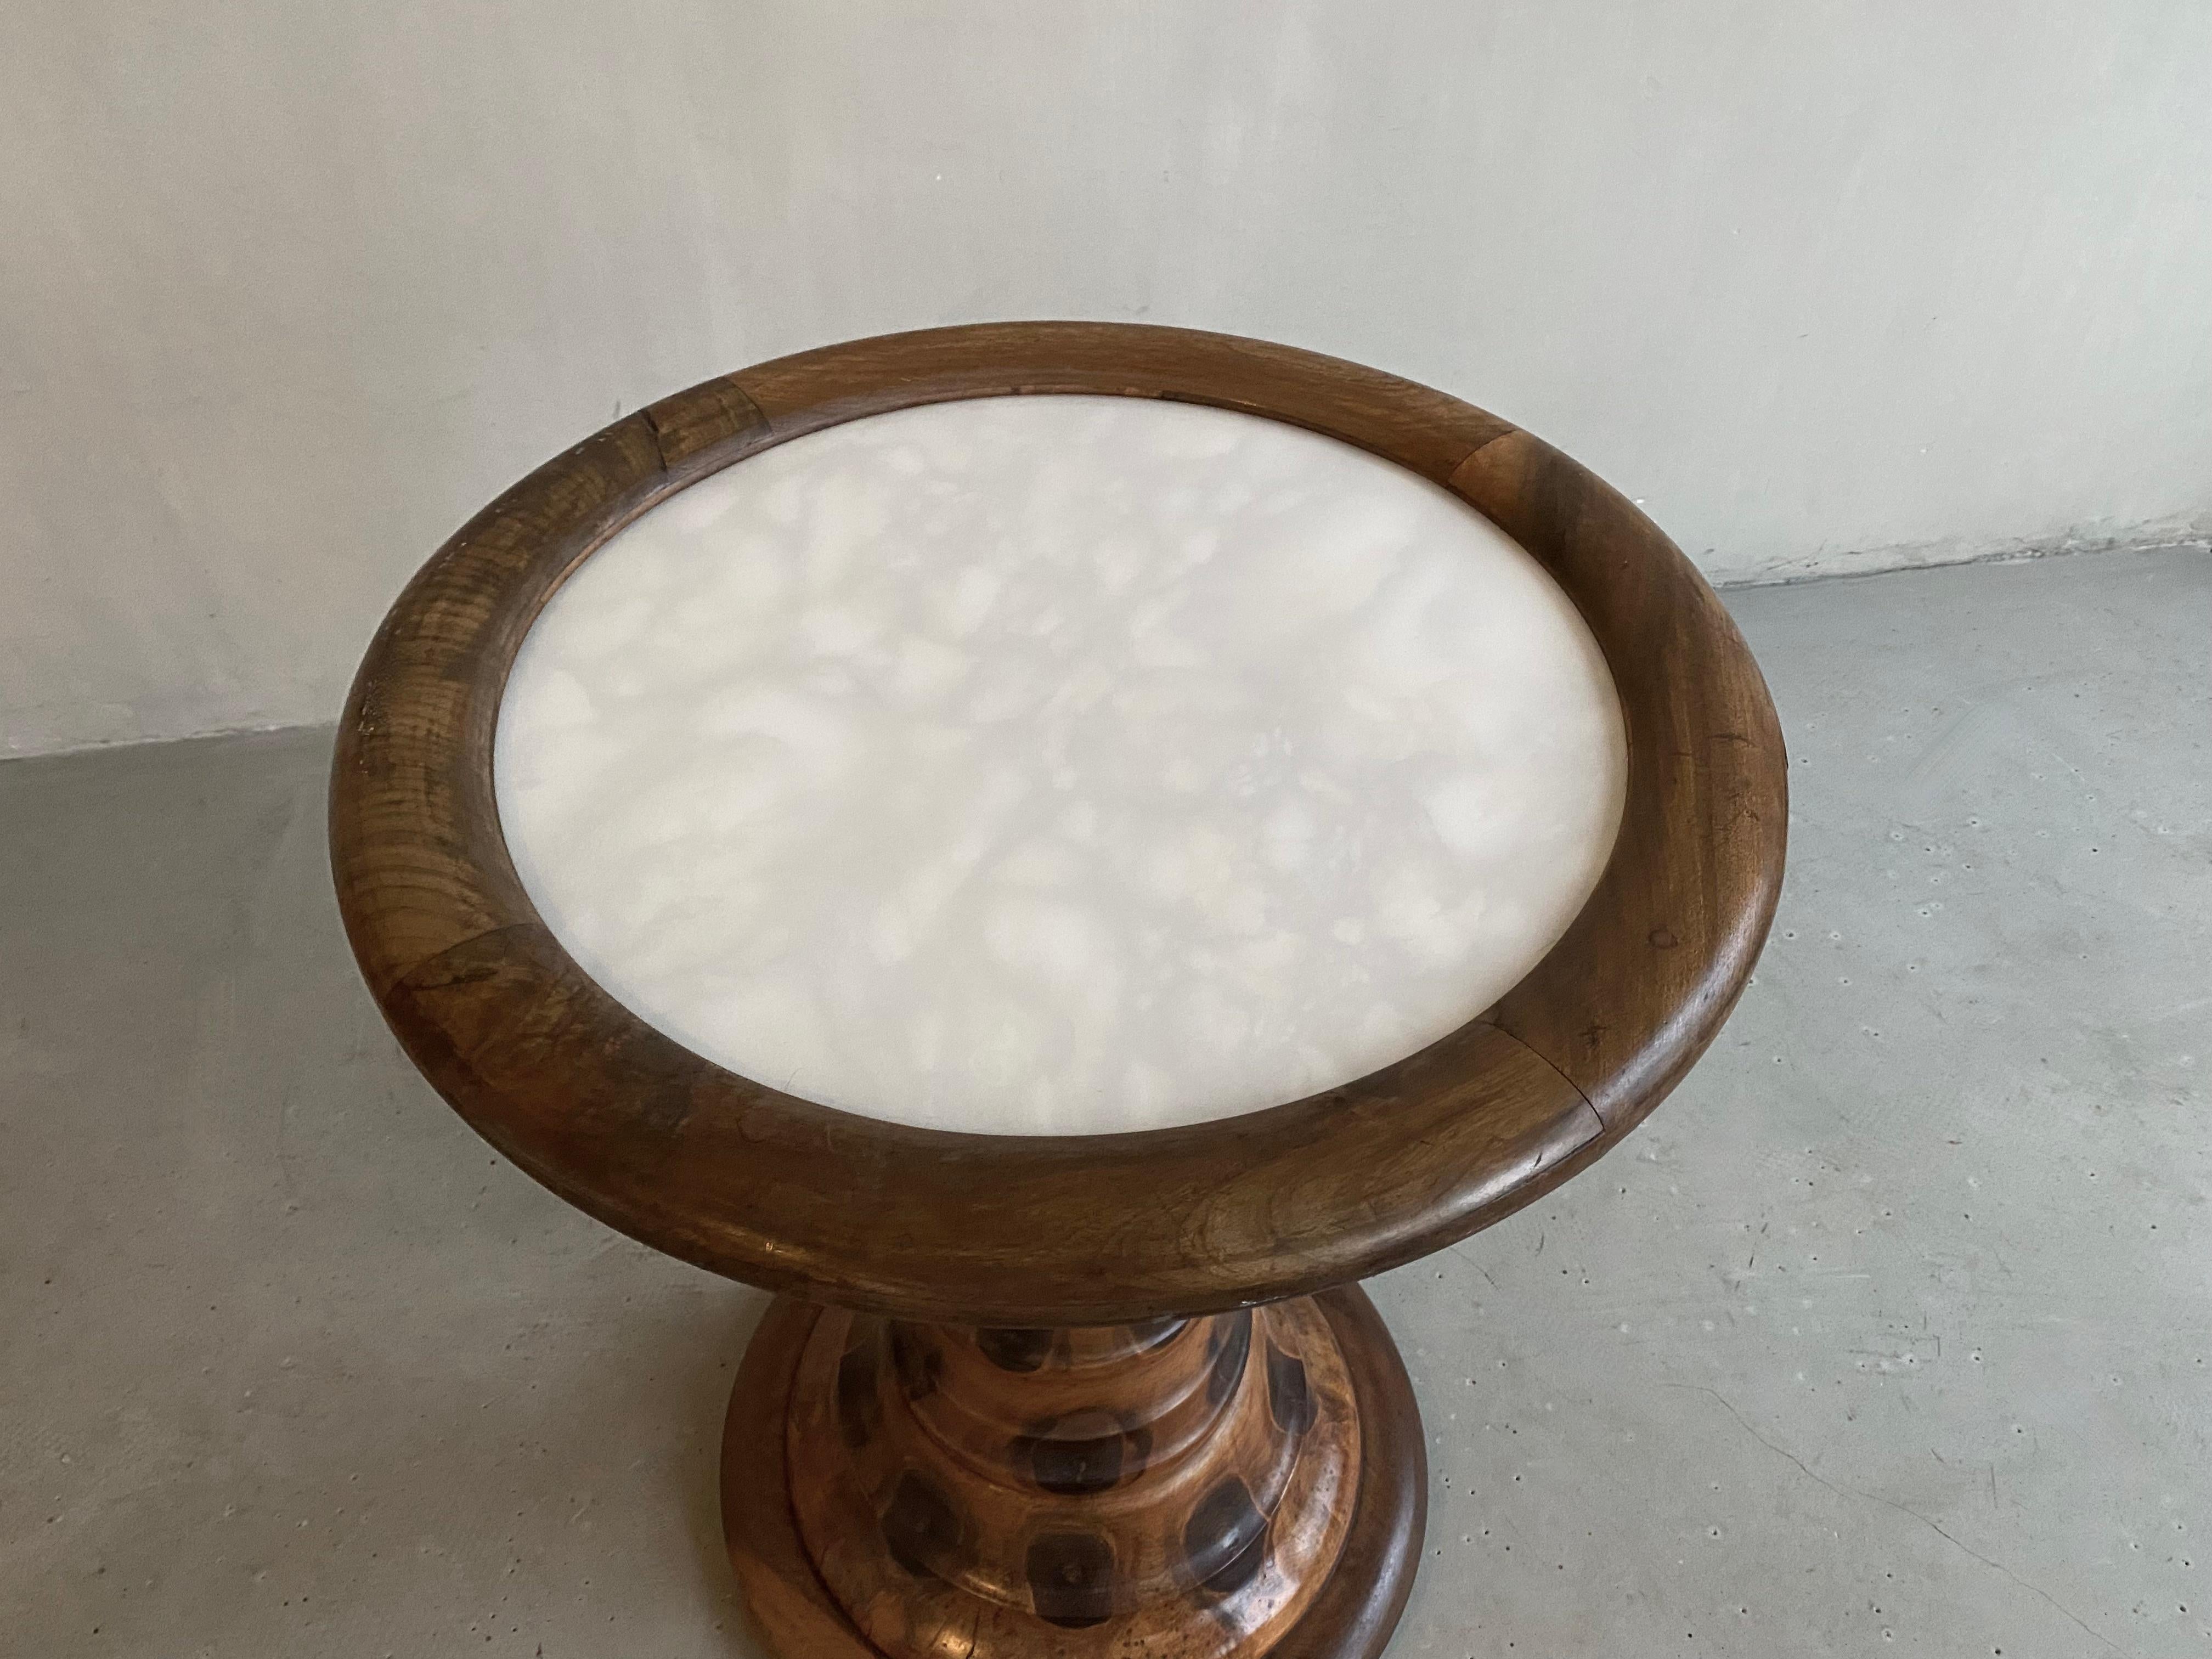 Unusual Brazilian monkey wood Pedestal table with a beautiful Italian Carrara like top under glass.
A tapering vintage table and circular platform base. Unique!

Labeled by maker 